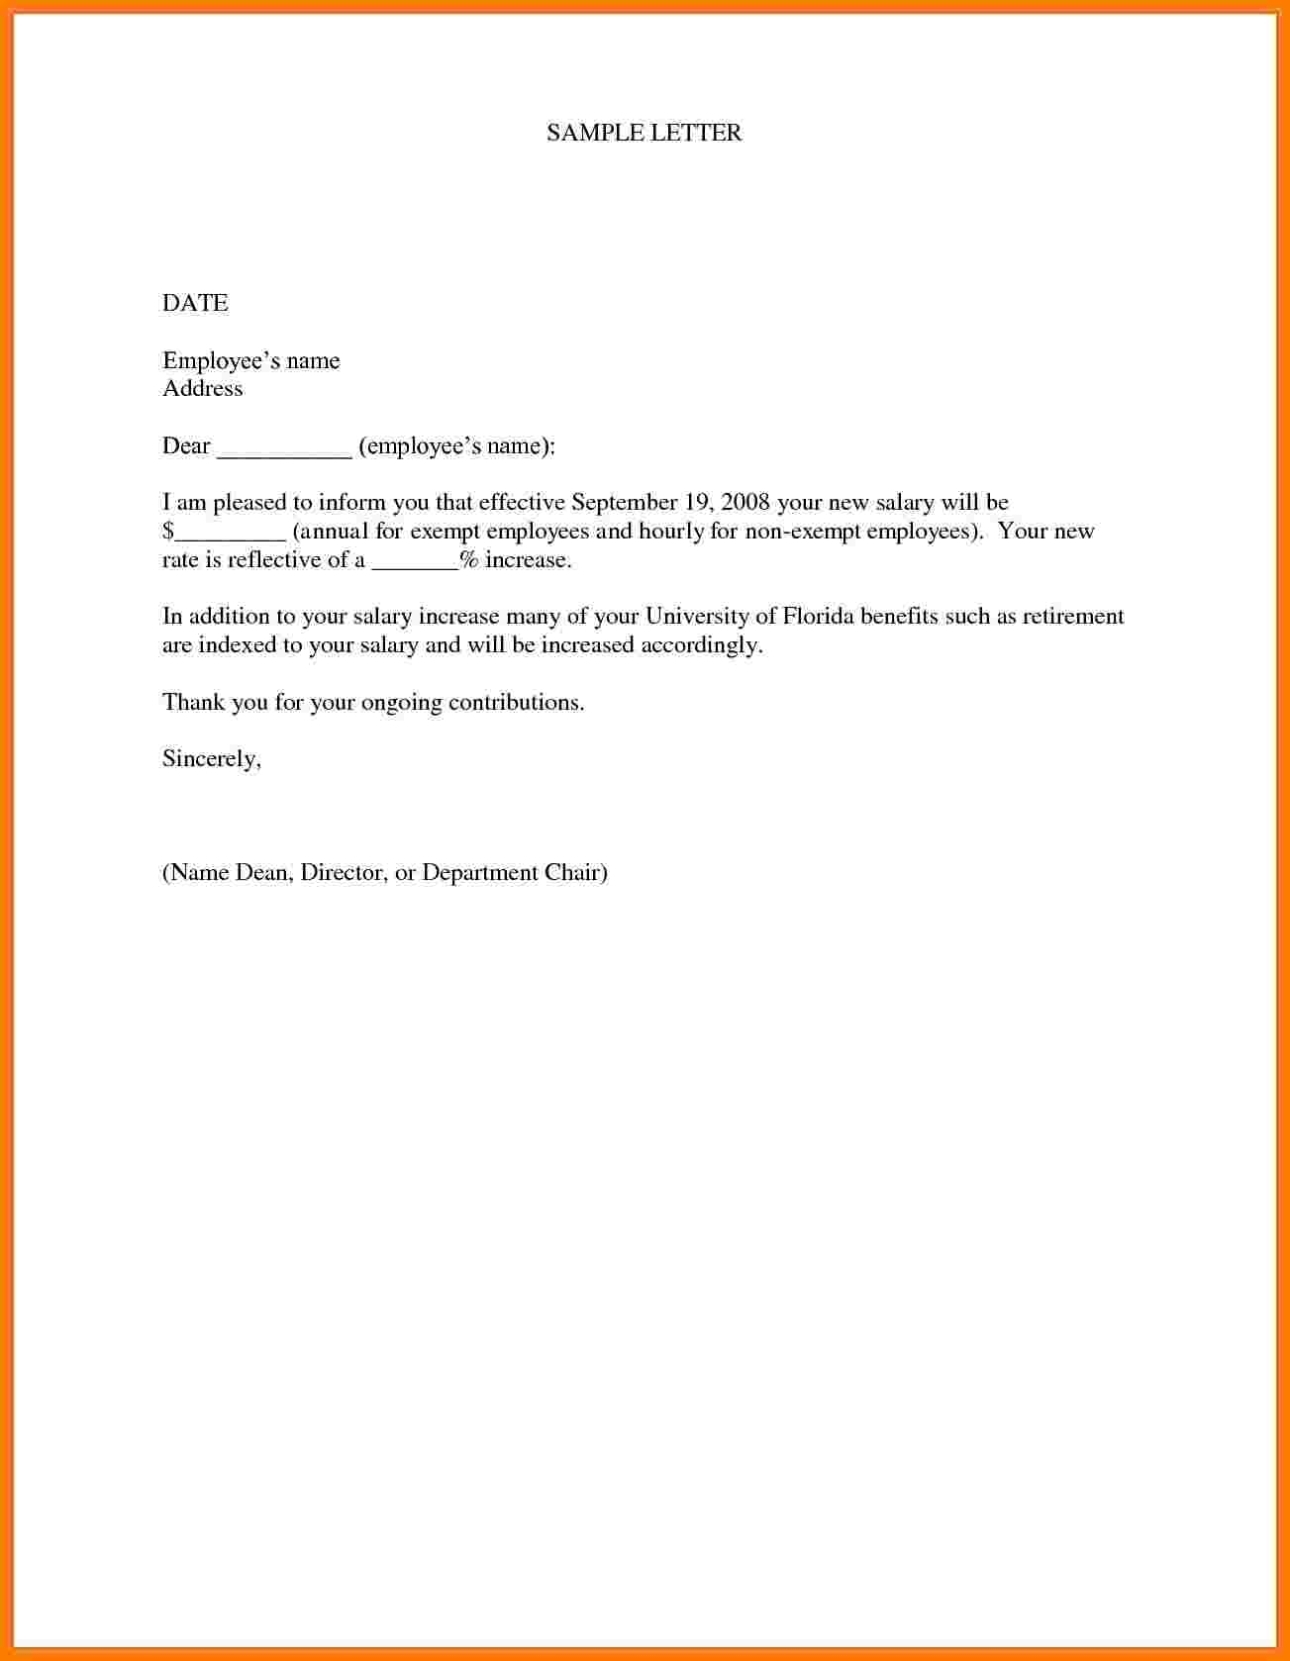 Salary Increase Letter To Employees | Charlotte Clergy Coalition within Request For Raise Letter Template